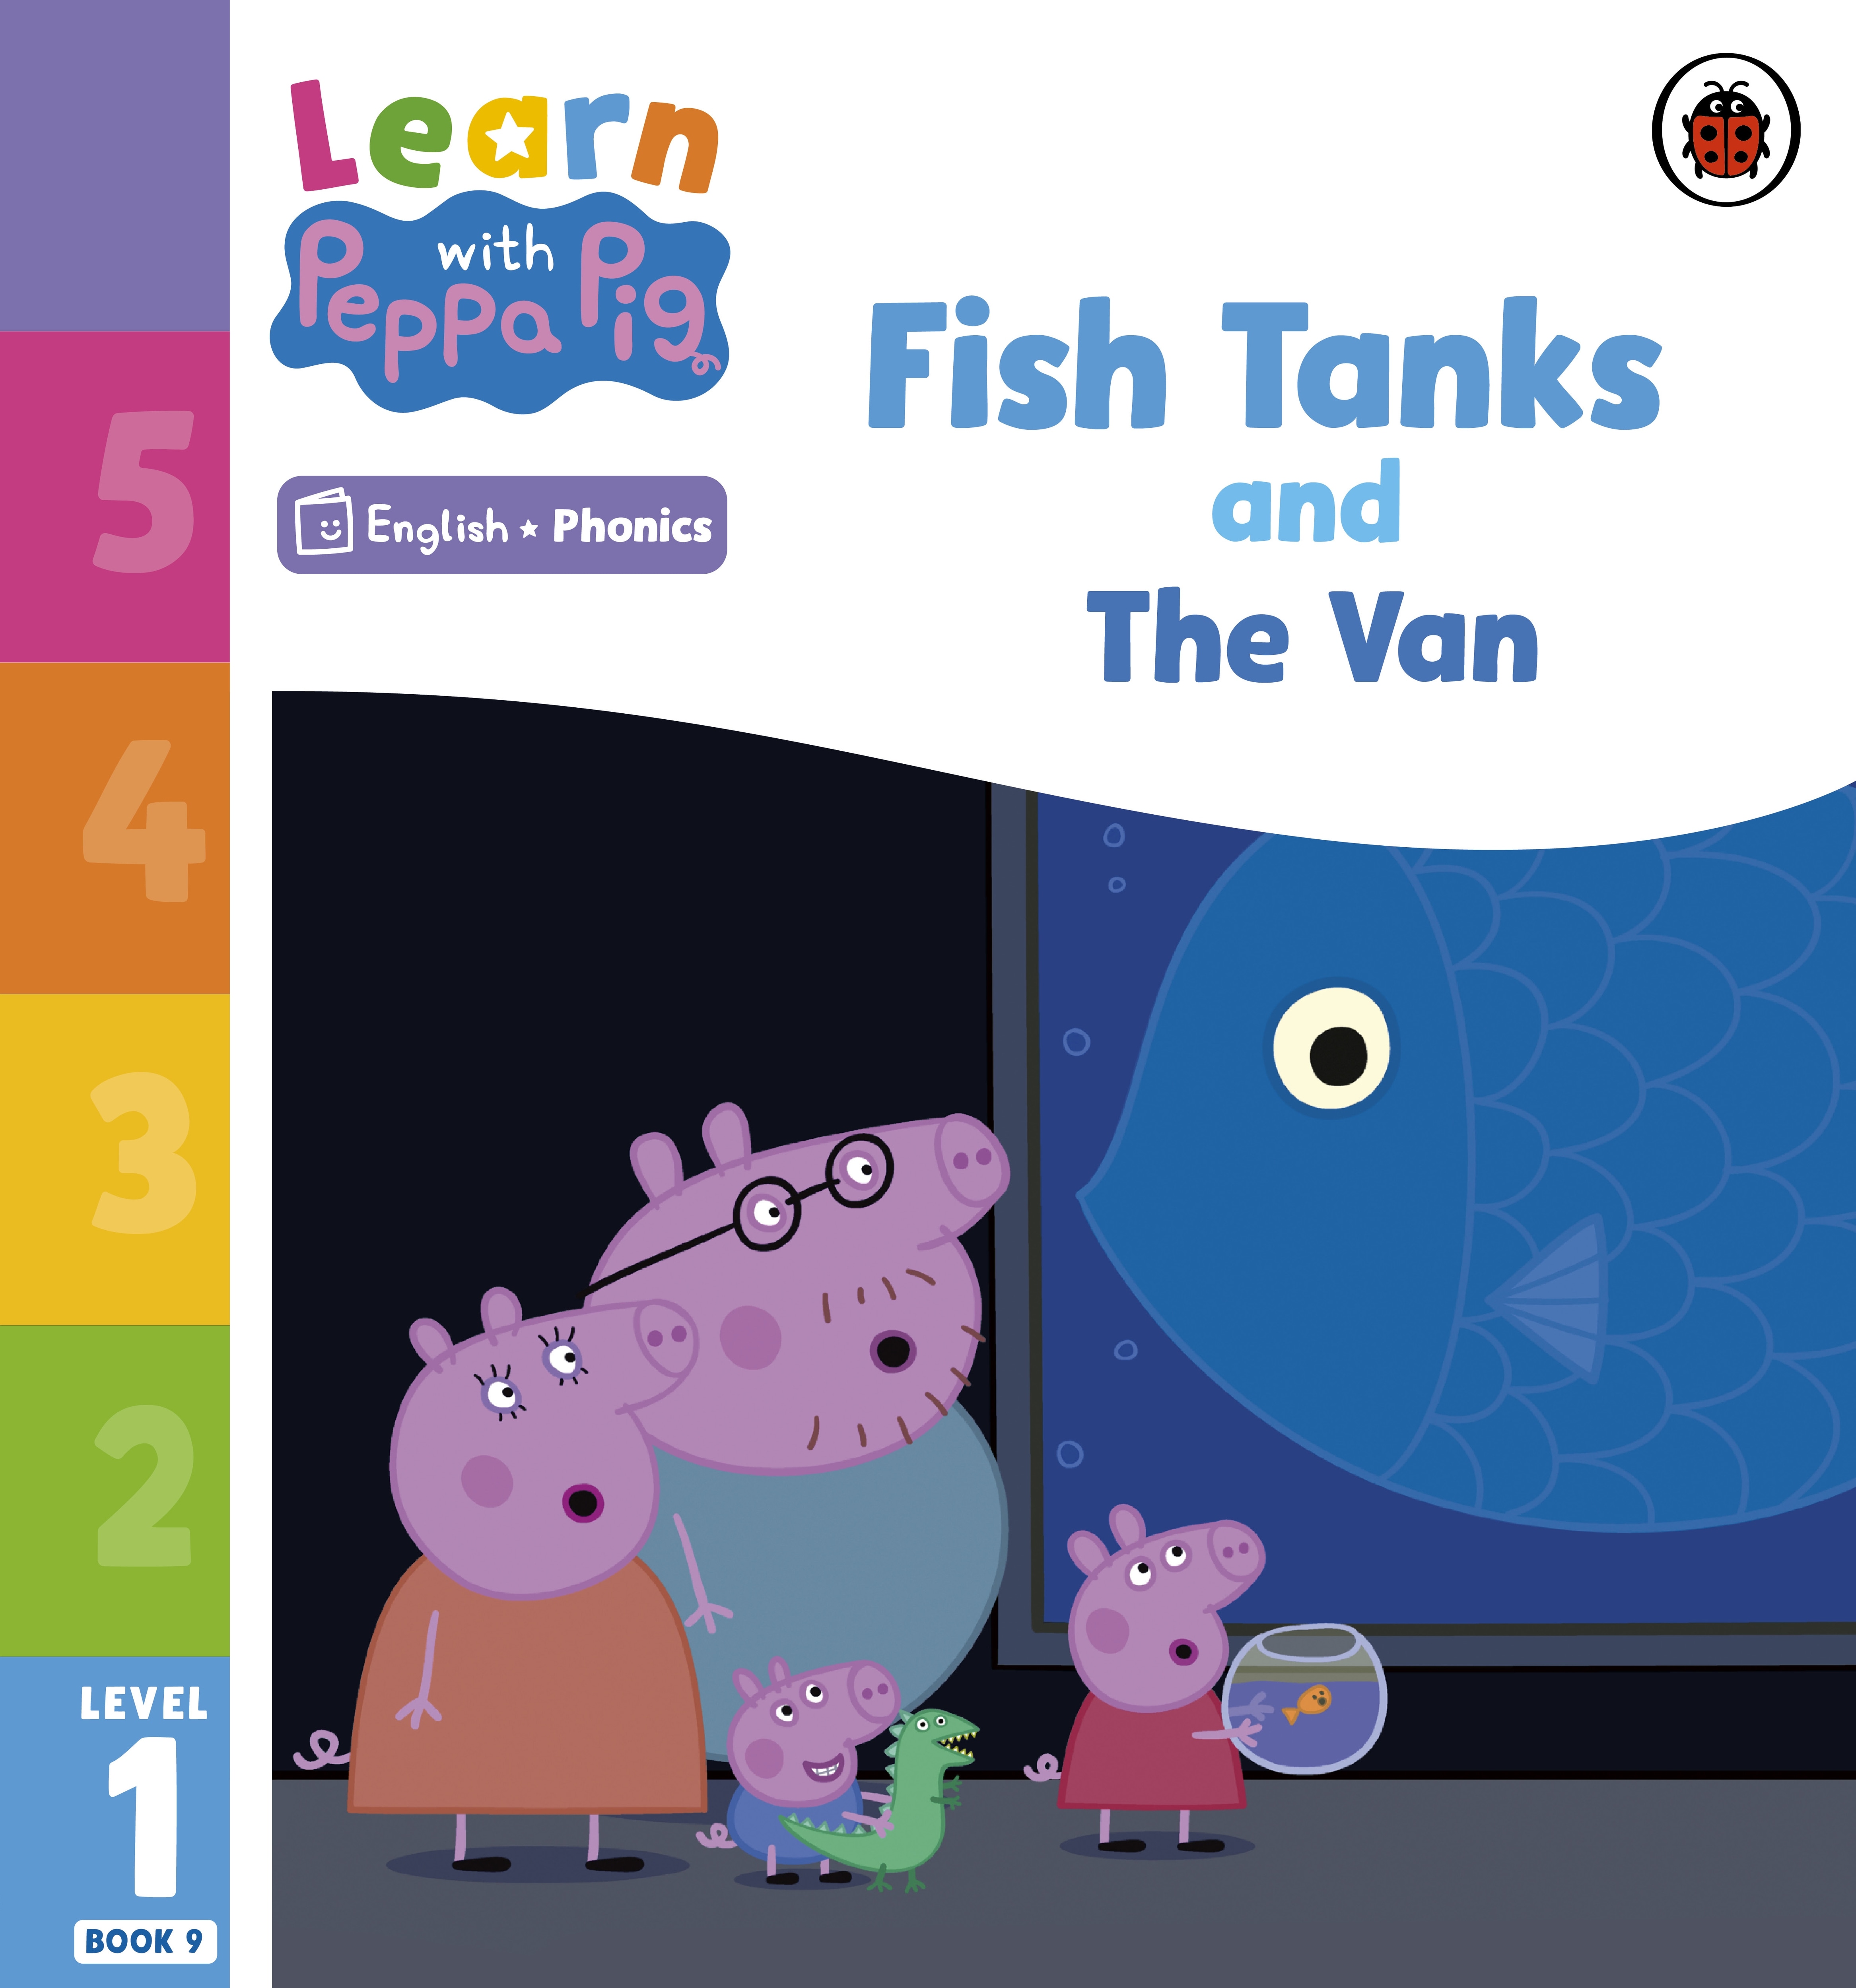 Book “Learn with Peppa Phonics Level 1 Book 9 — Fish Tanks and The Van (Phonics Reader)” by Peppa Pig — January 5, 2023